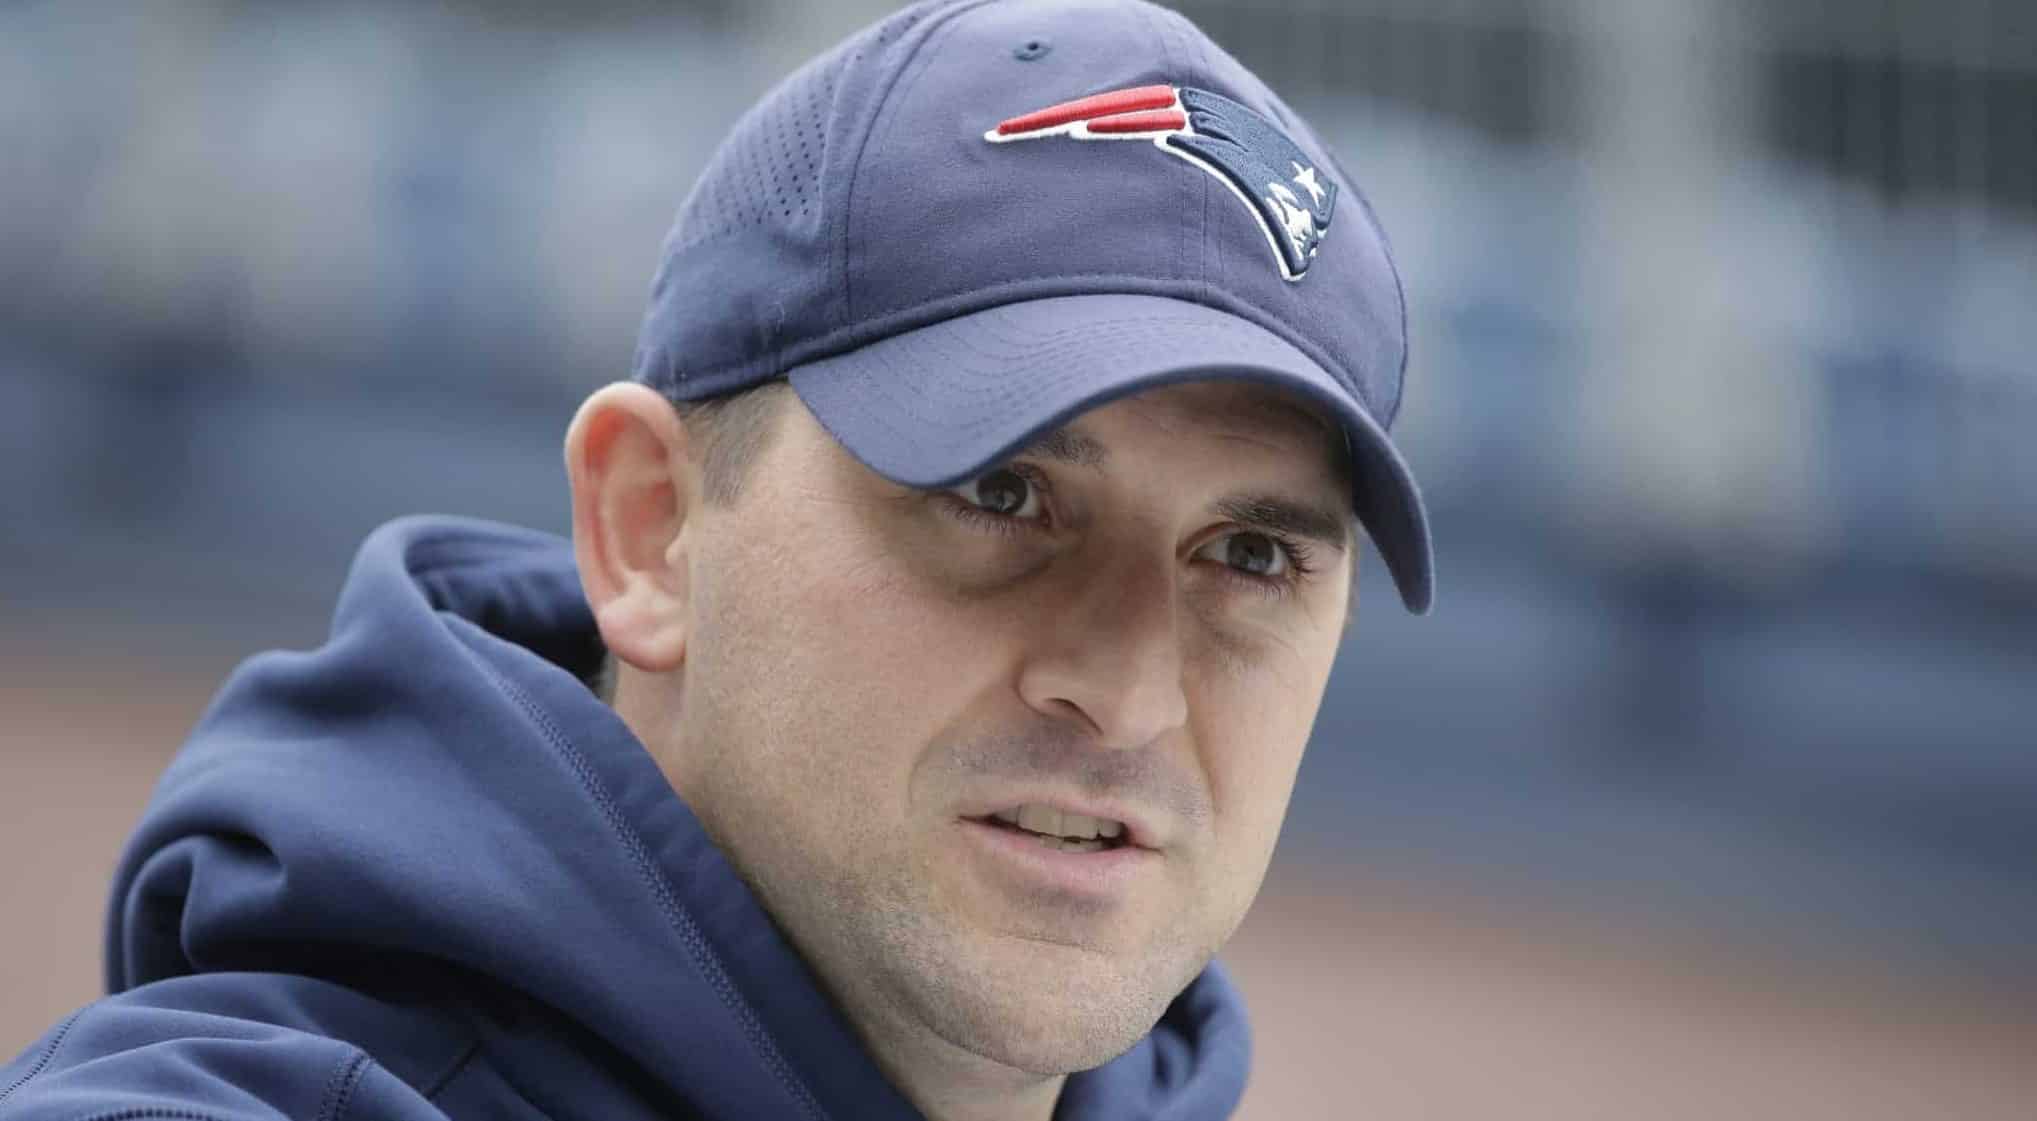 New England Patriots special teams coach Joe Judge speaks with reporters before an NFL football practice, Thursday, Nov. 1, 2018, in Foxborough, Mass.